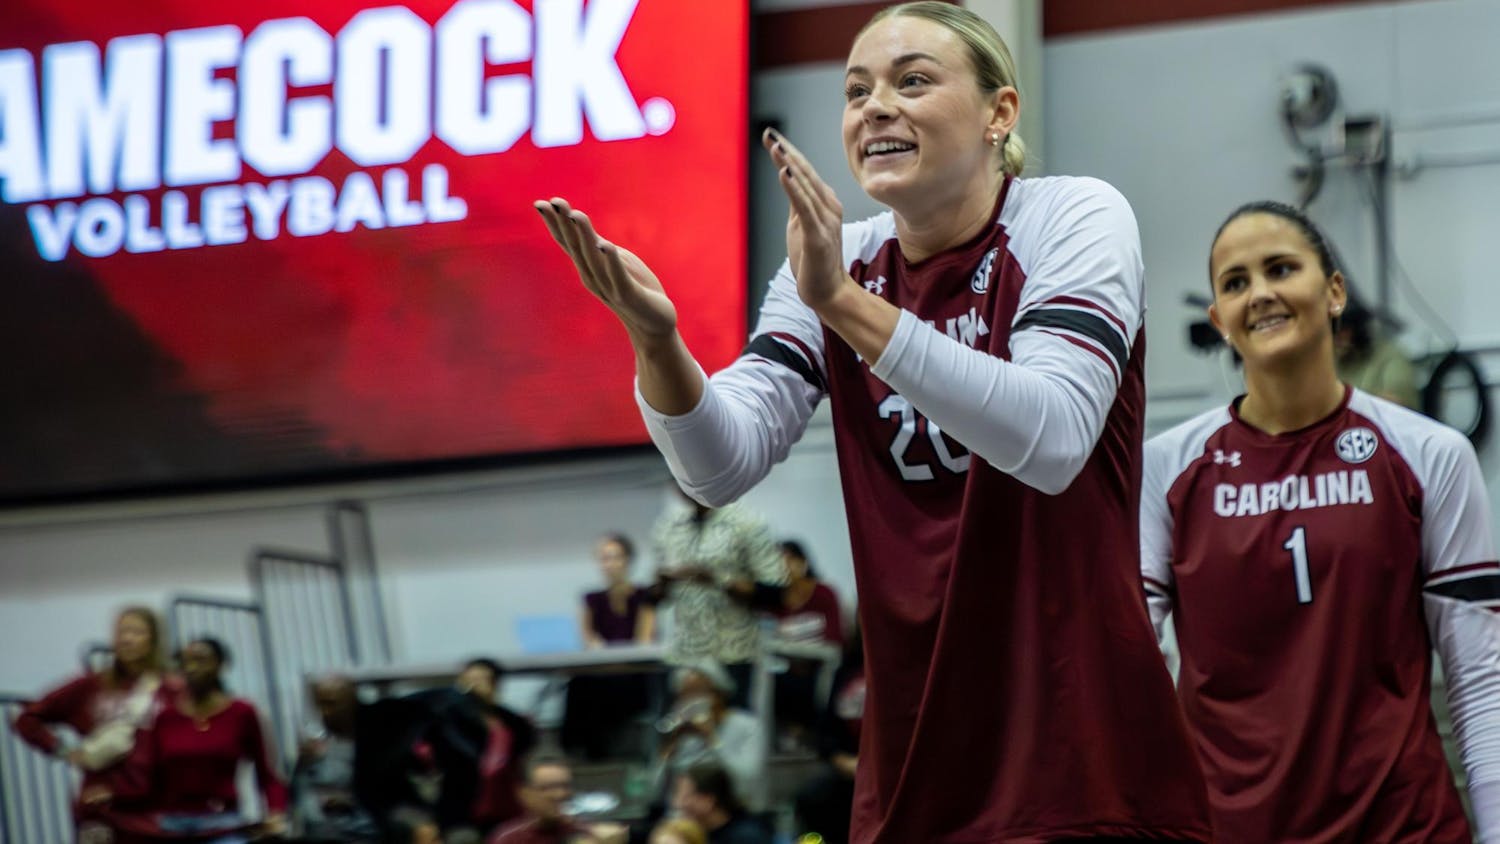 Senior outside hitter Riley Whitesides cheers on her teammates during warm-ups before South Carolina faced Ole&nbsp;Miss on Nov. 5, 2023. Whitesides is among the most well-achieved Gamecocks, being named the SEC Freshman of the Week three times and now registering over 1,000 kills in her career.